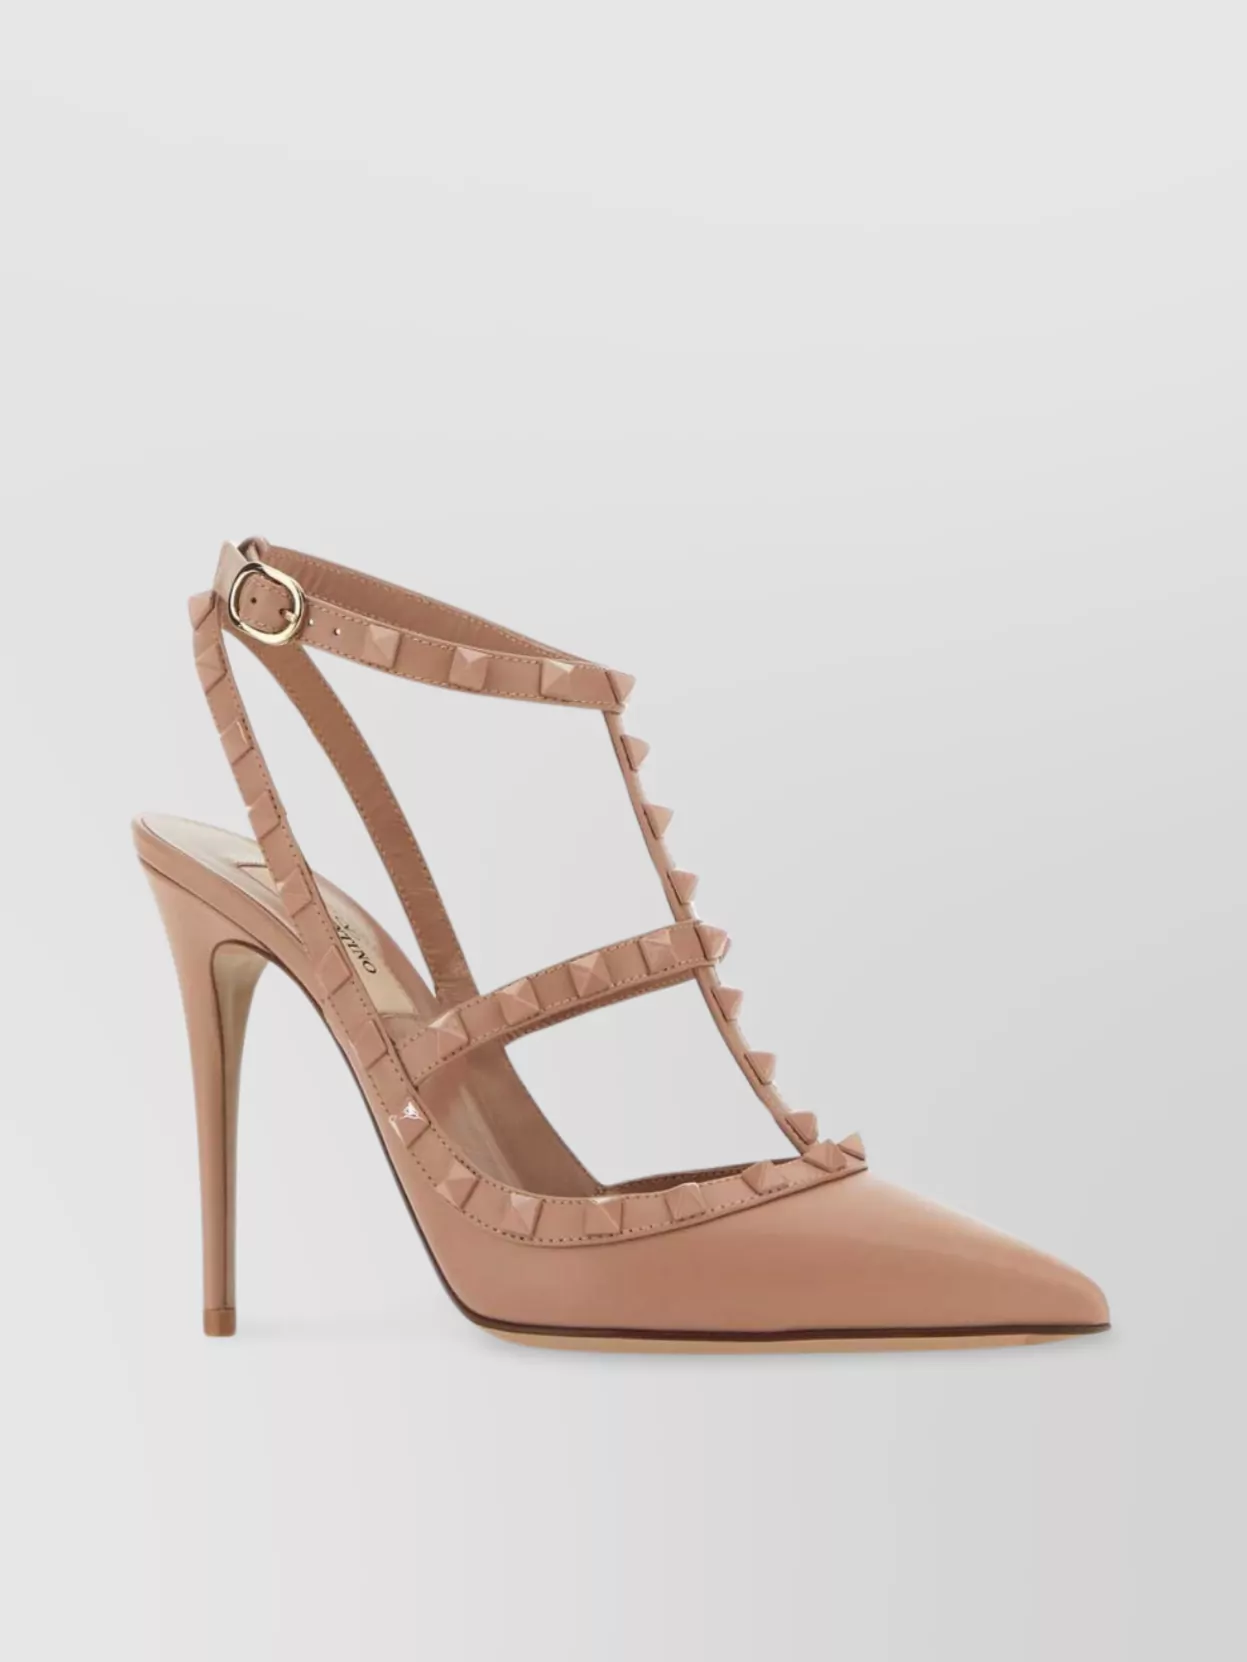 Shop Valentino Rockstud Leather Pumps Pointed Toe